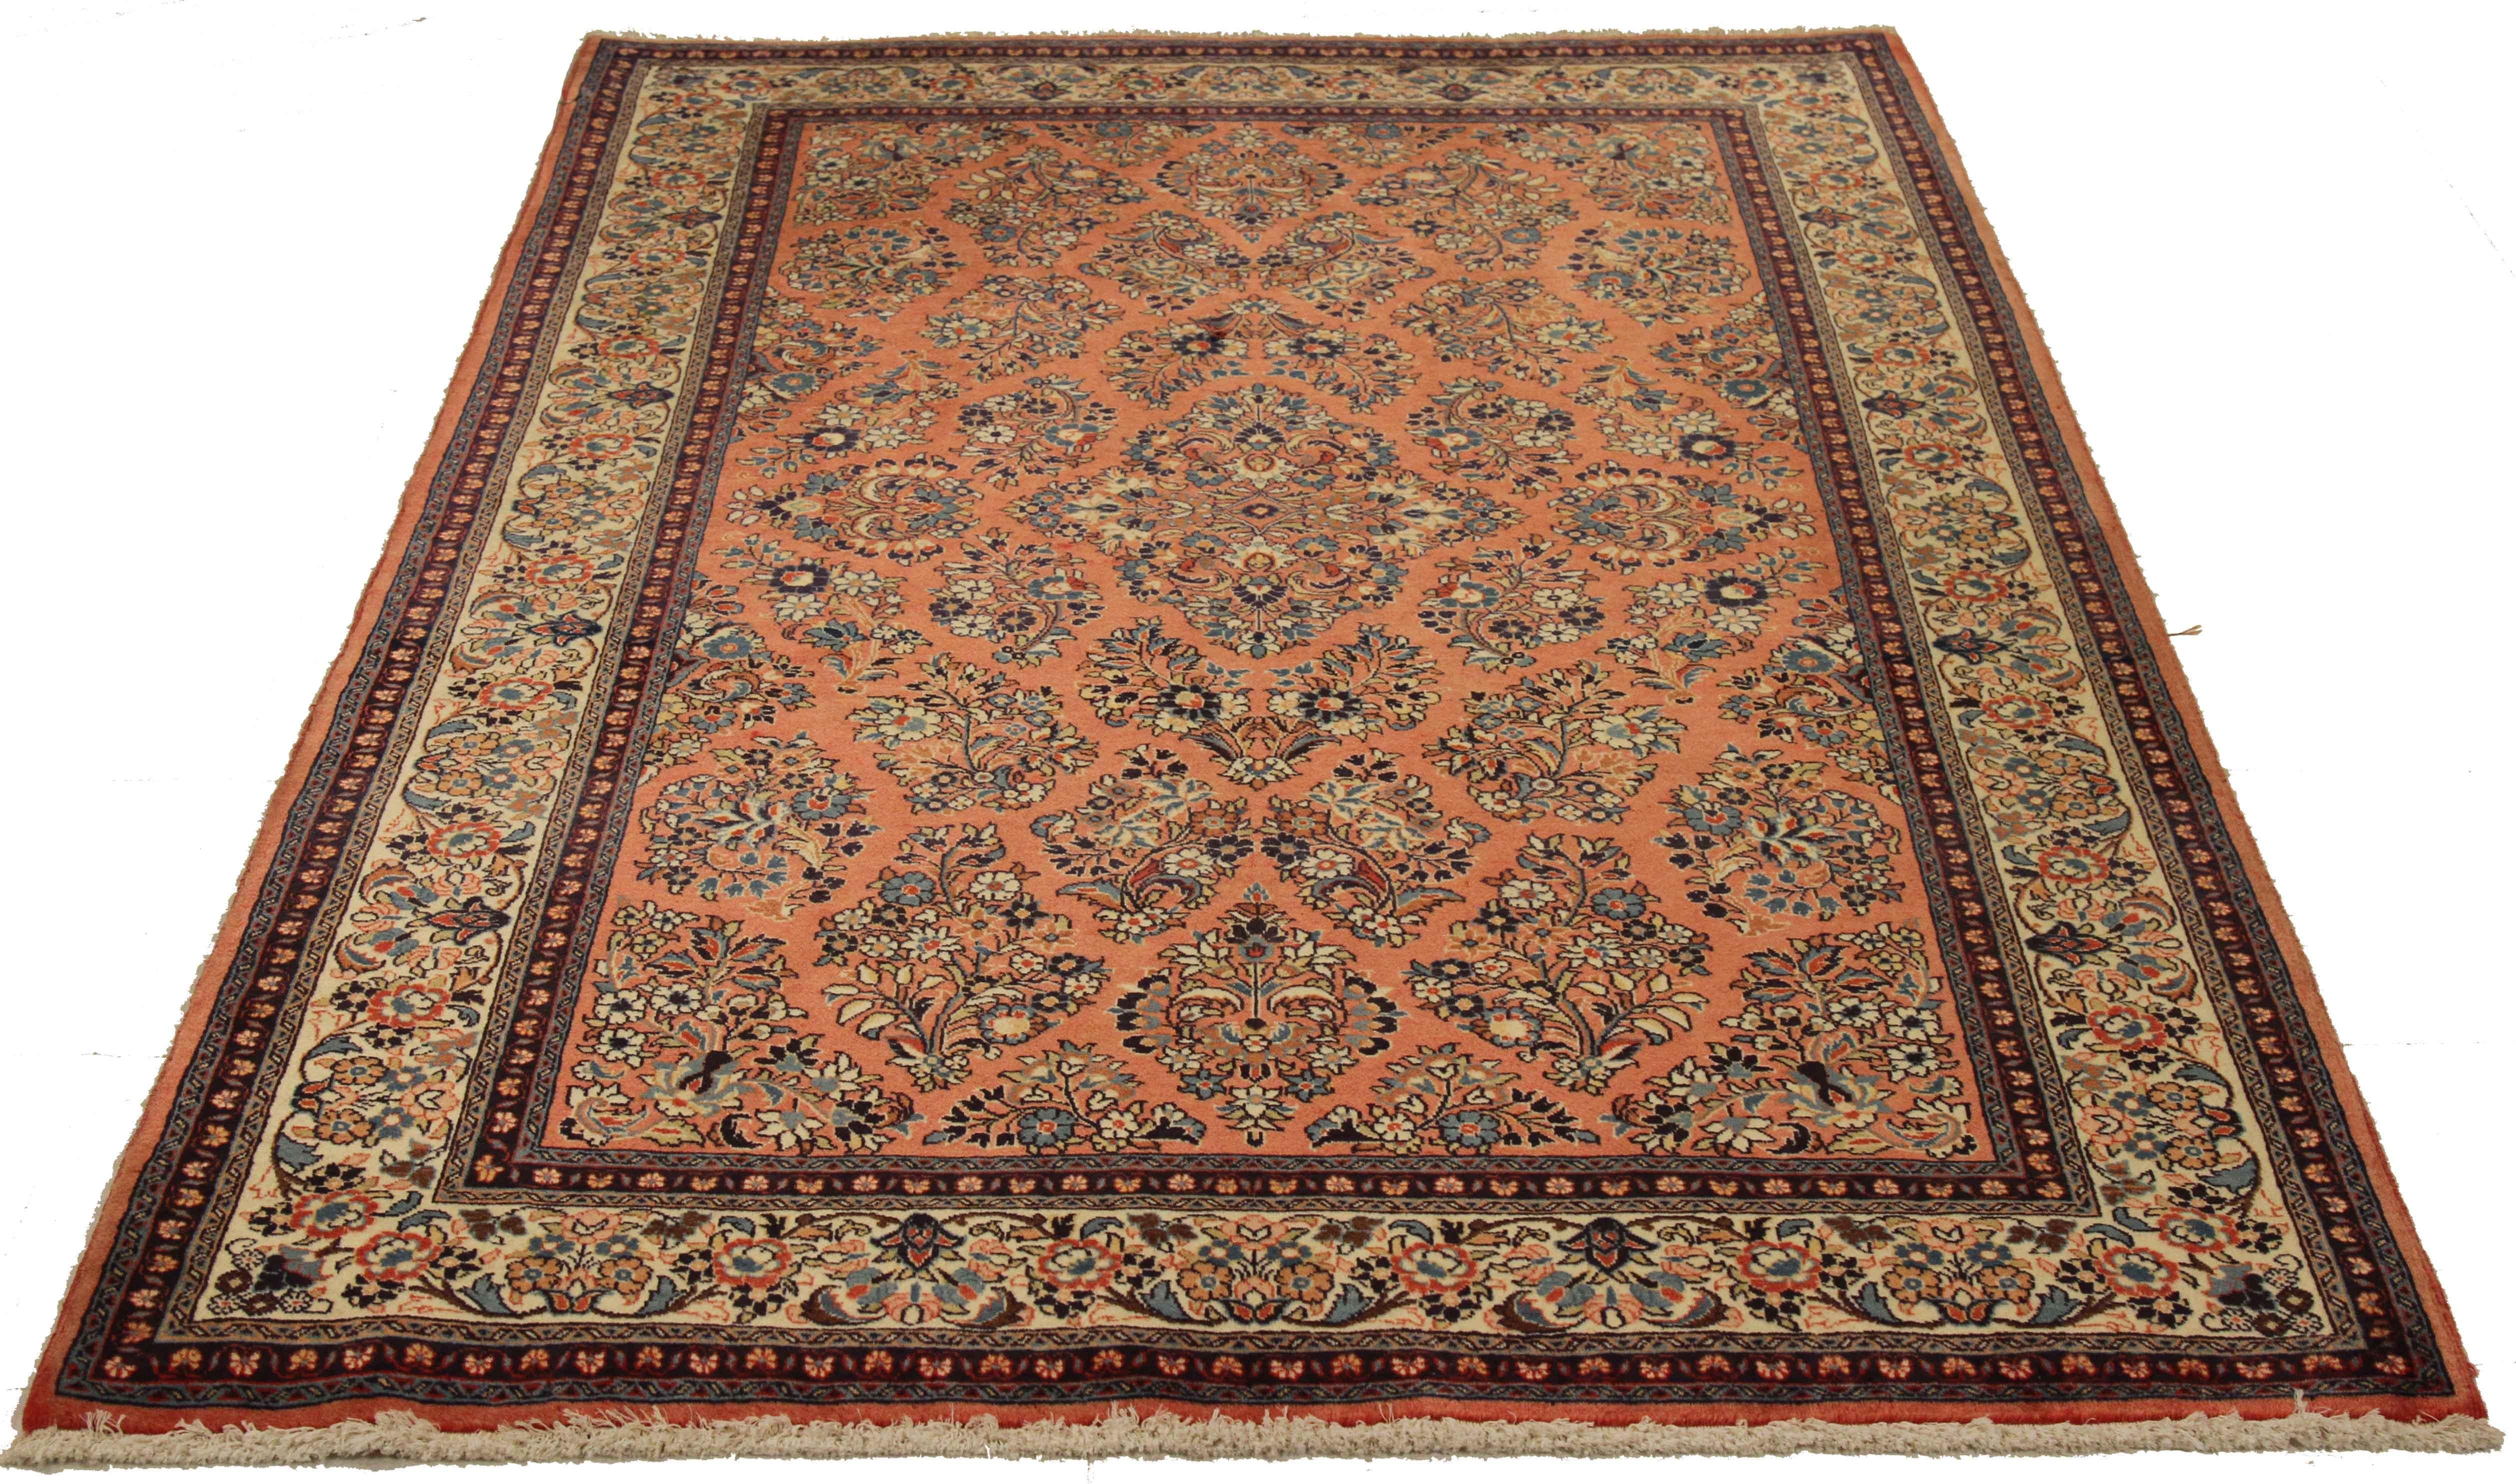 Oushak Antique Persian Sarouk Rug with Blue and Ivory Flower Heads on Red Center Field